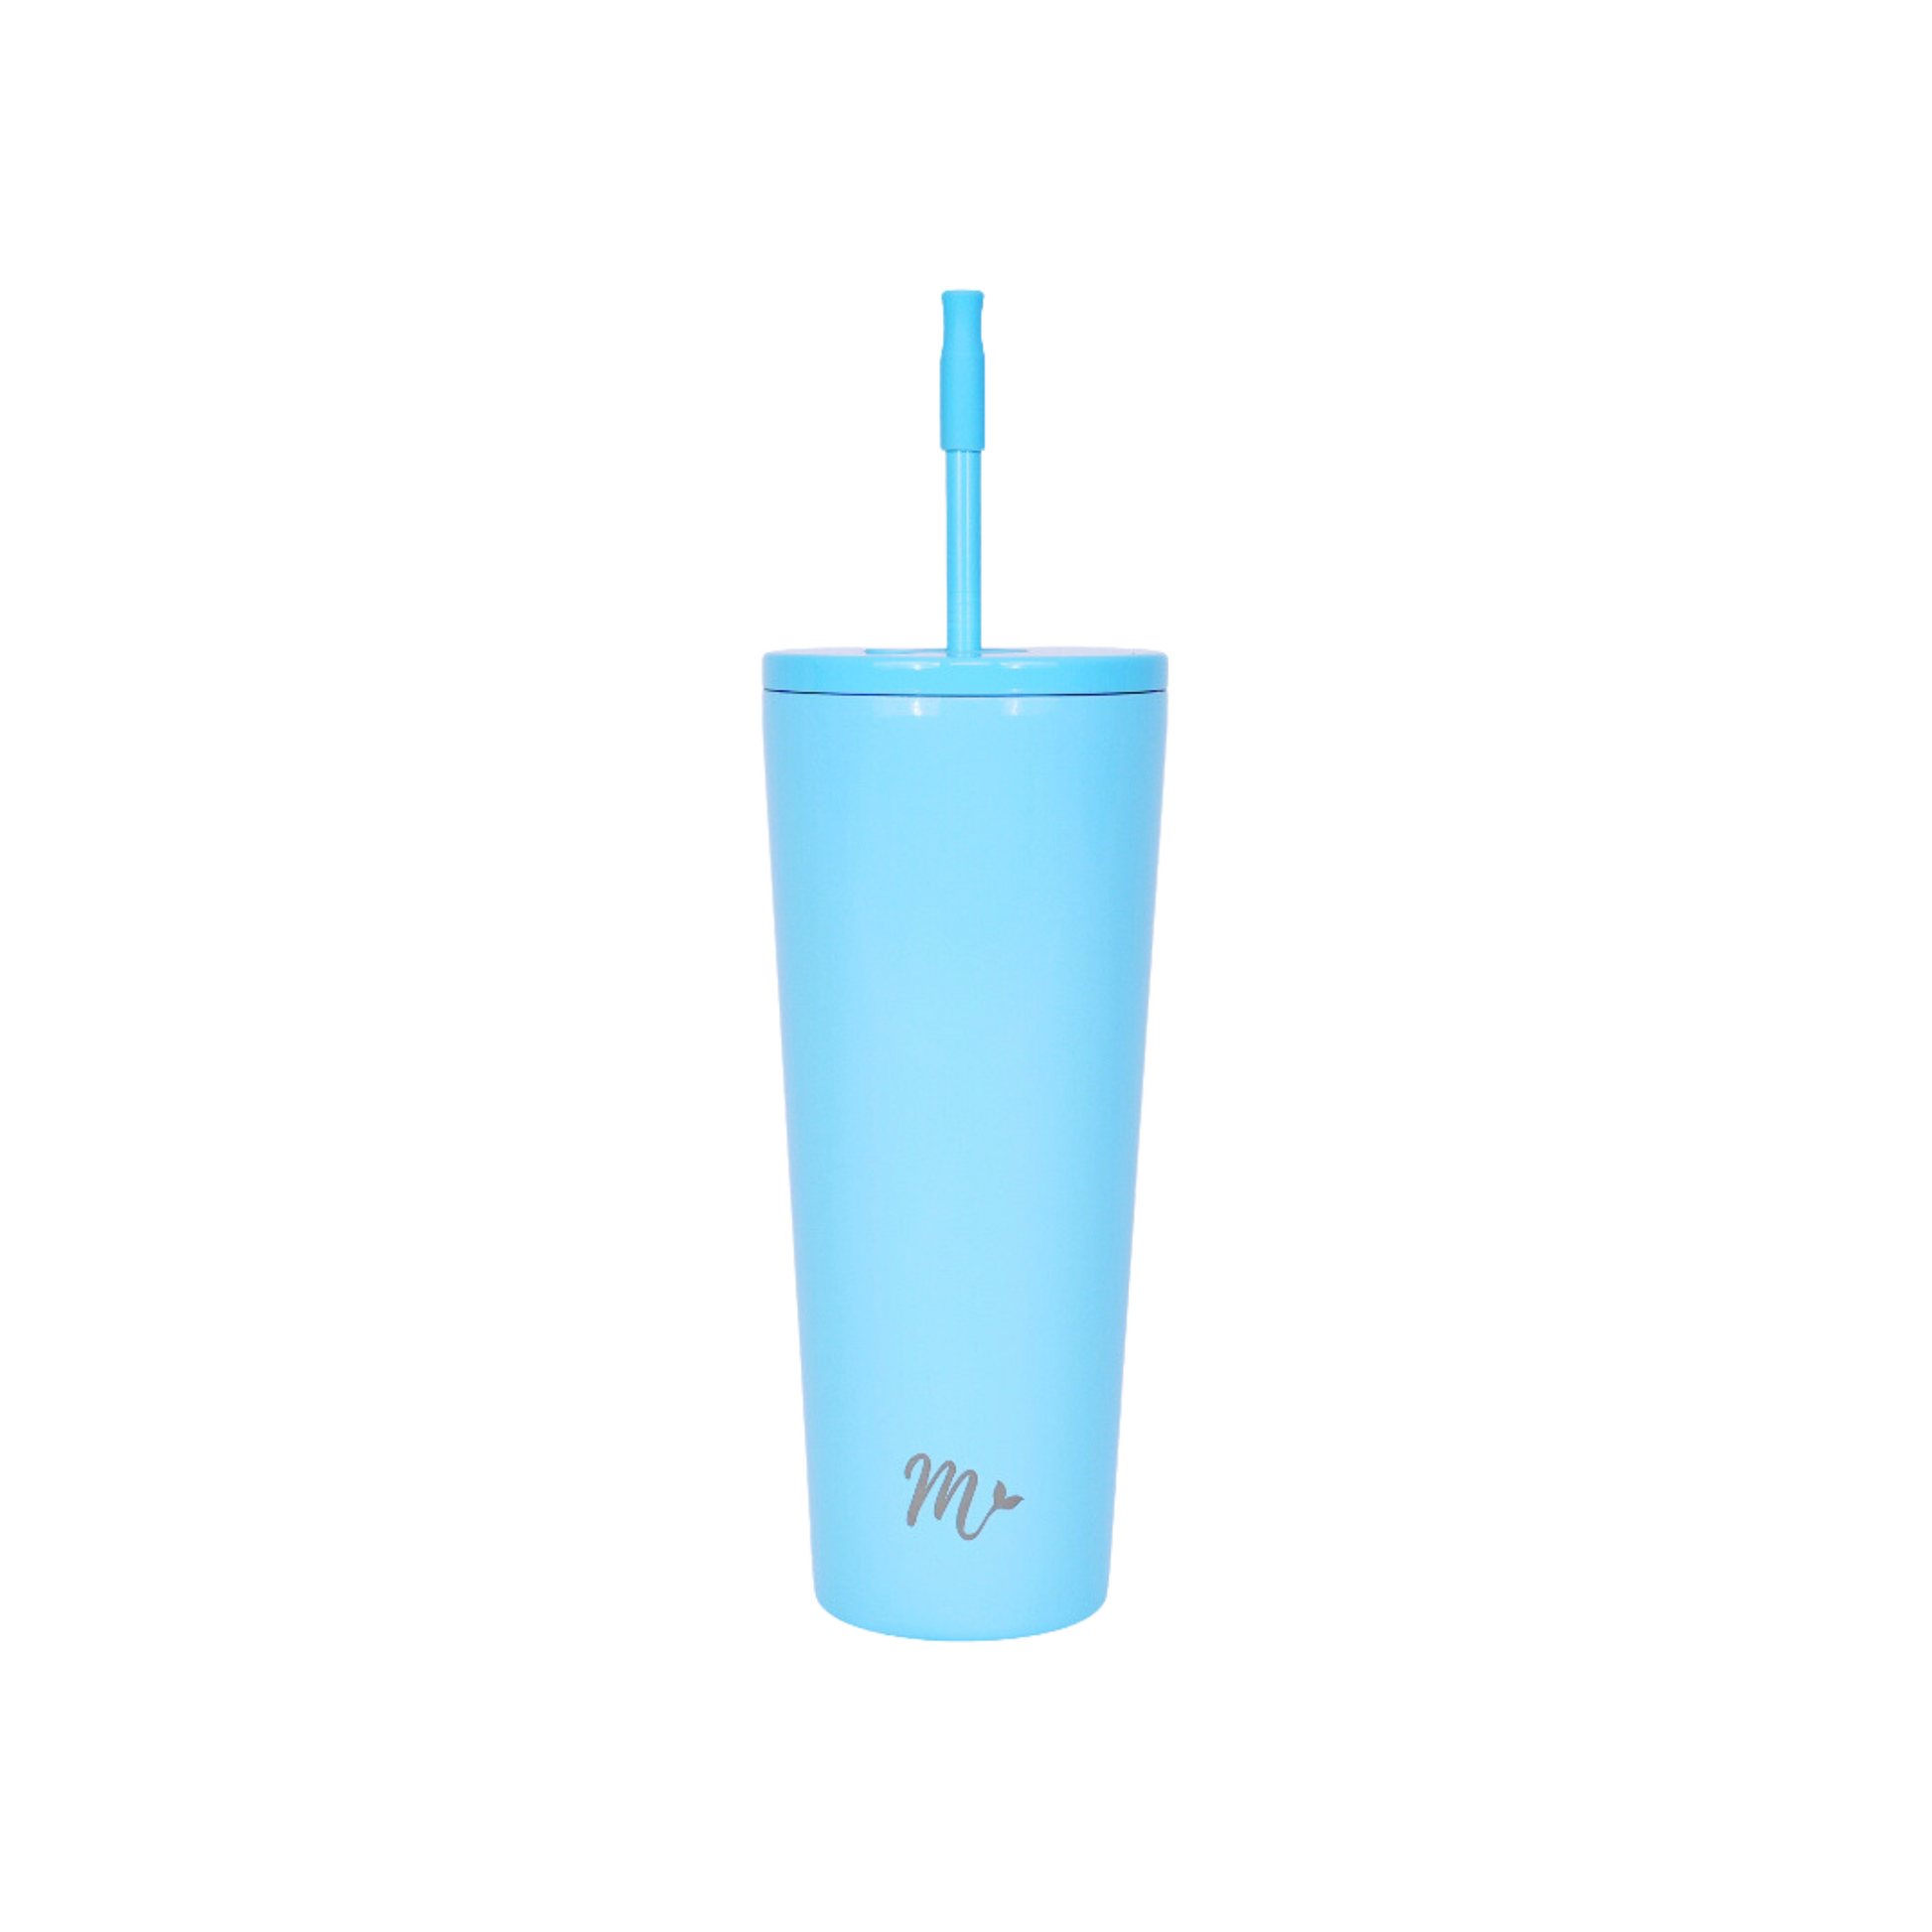 pastel tumbler, blue tumbler, light blue 22oz cup, leakproof tumbler, cute trendy cup, travel mug, straw included, keeps drinks cold, aesthetic cup